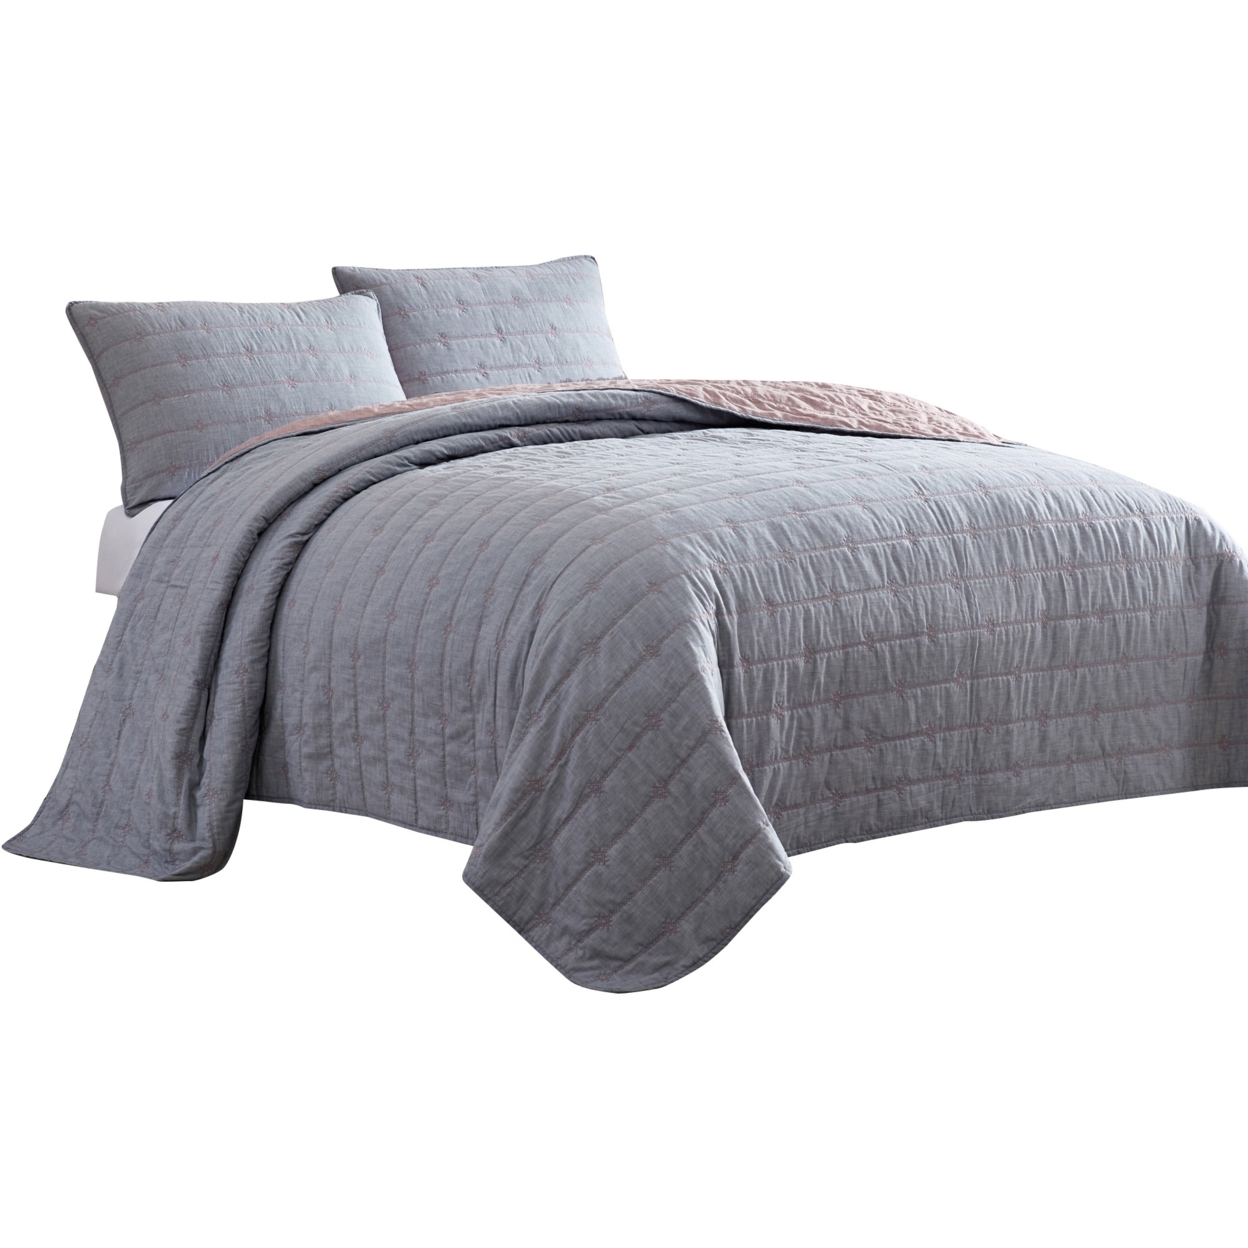 Veria 3 Piece King Quilt Set With Channel Stitching The Urban Port, Gray And Pink- Saltoro Sherpi